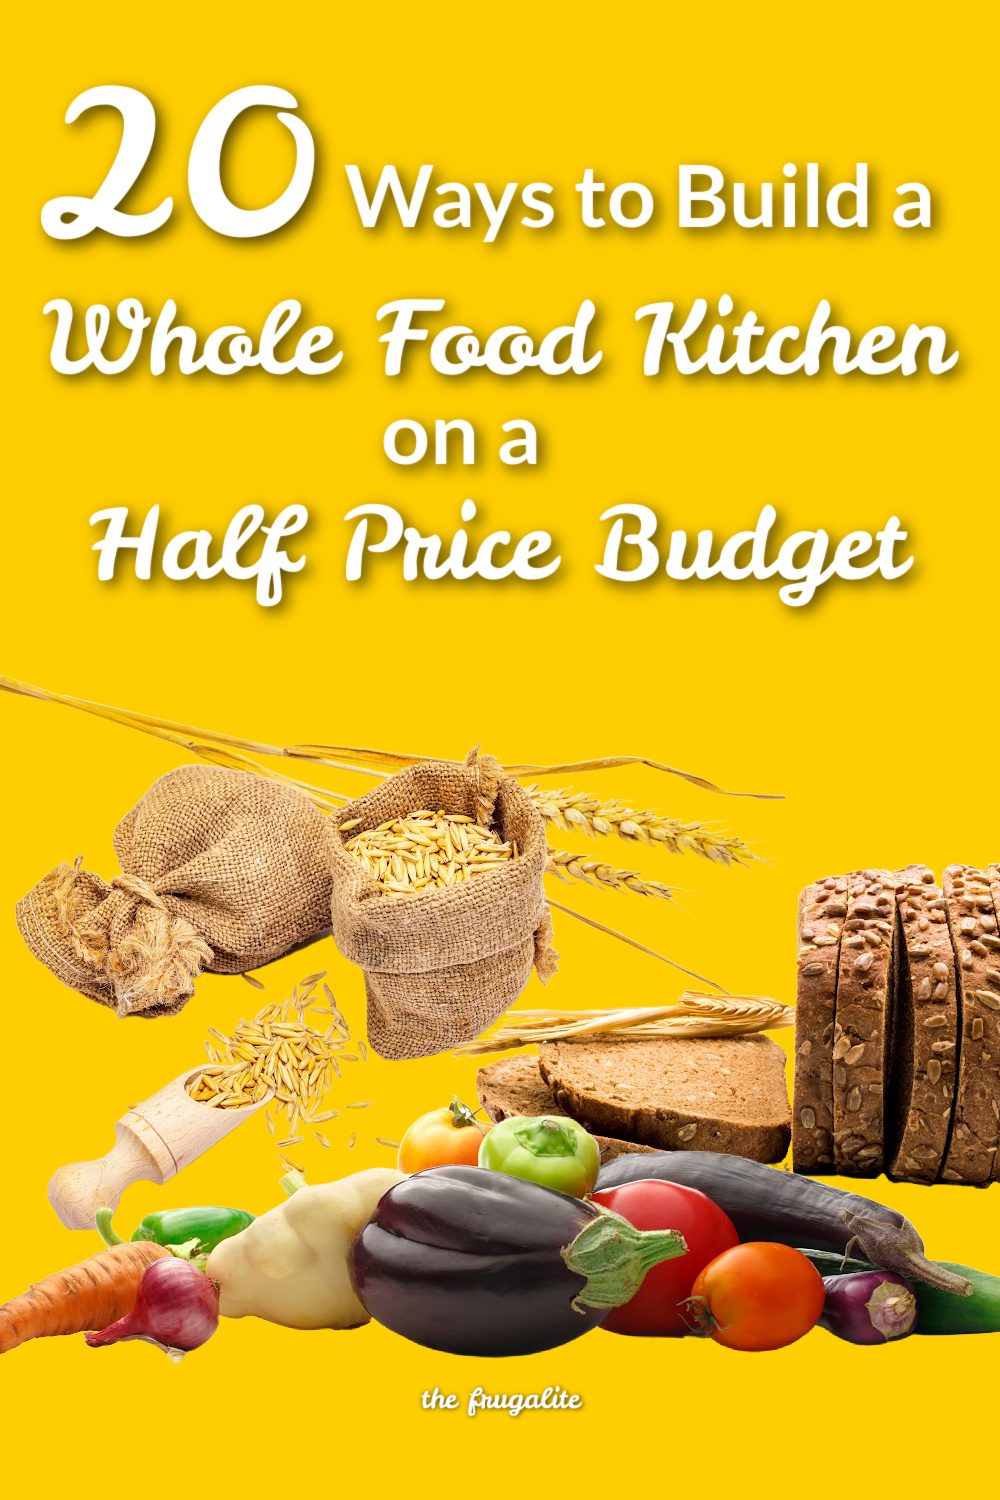 20 Ways to Build a Whole Food Kitchen on a Half Price Budget